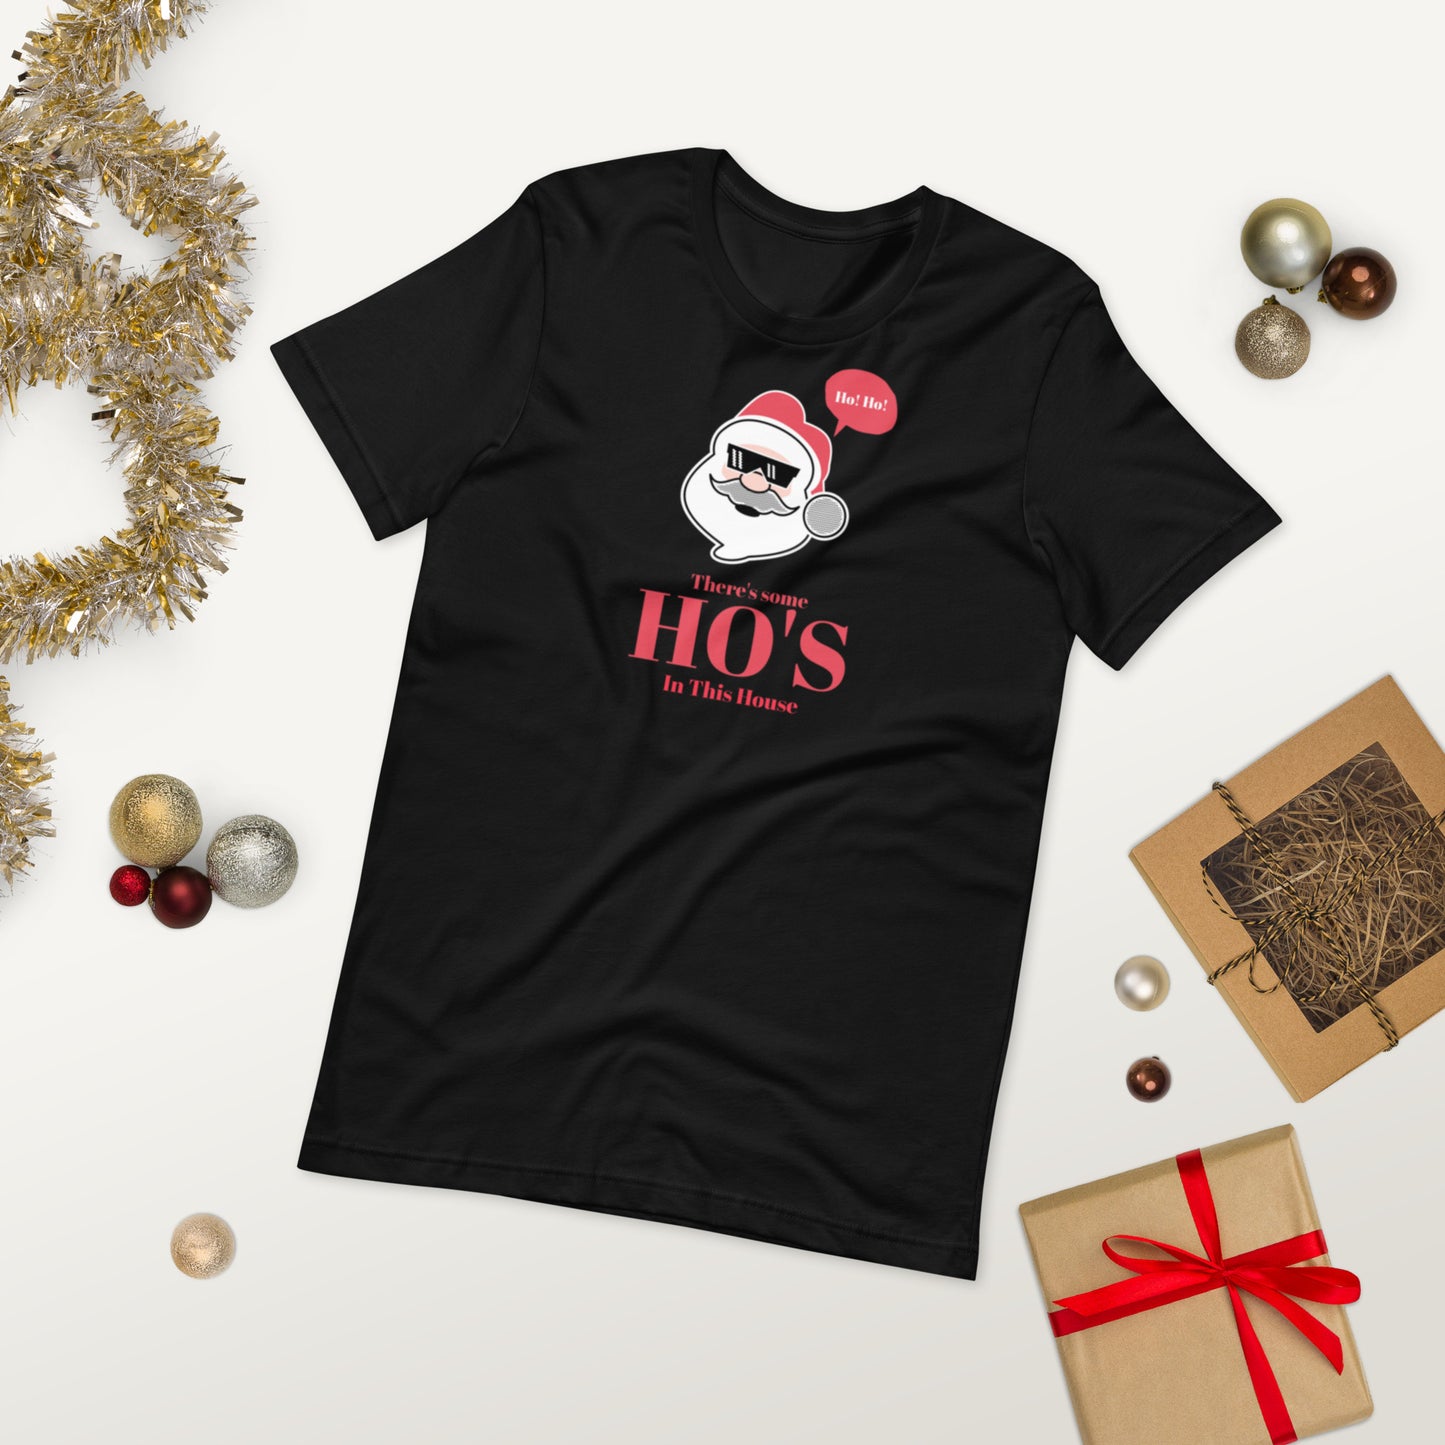 Funny Holiday T-shirt There's some Ho's In This House